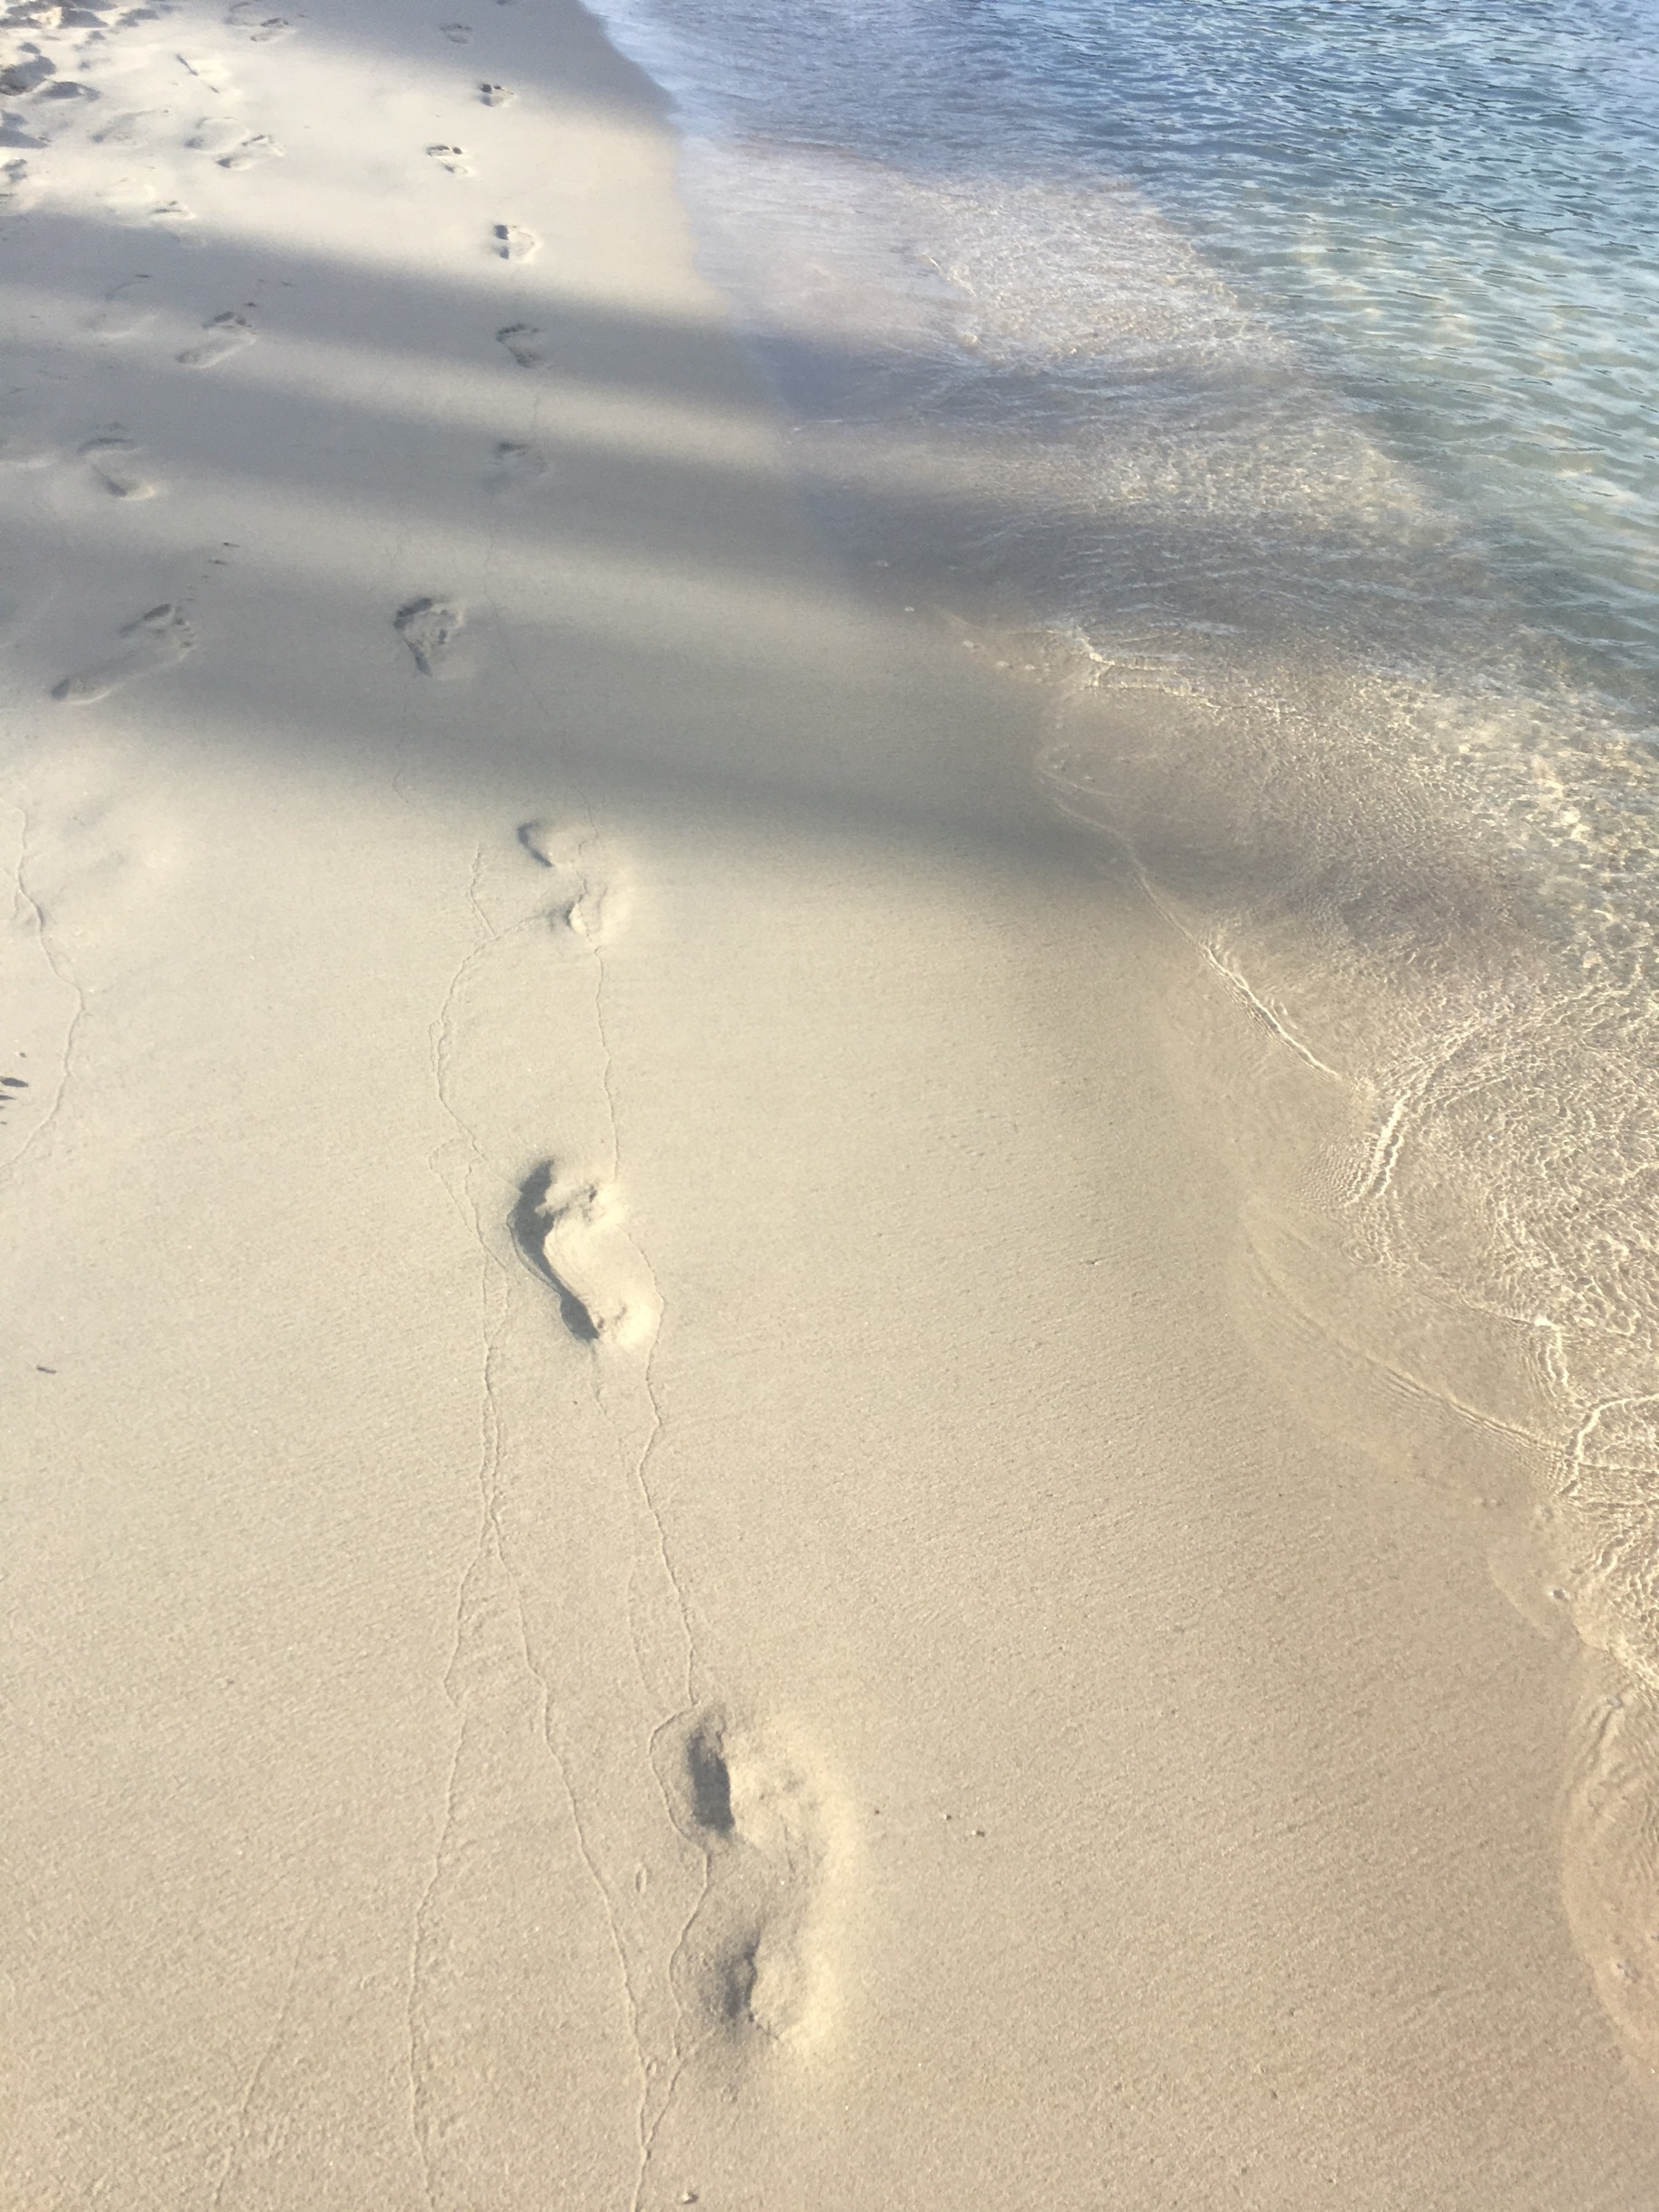 Warm waters lapping your feet, the softest white sand underfoot.